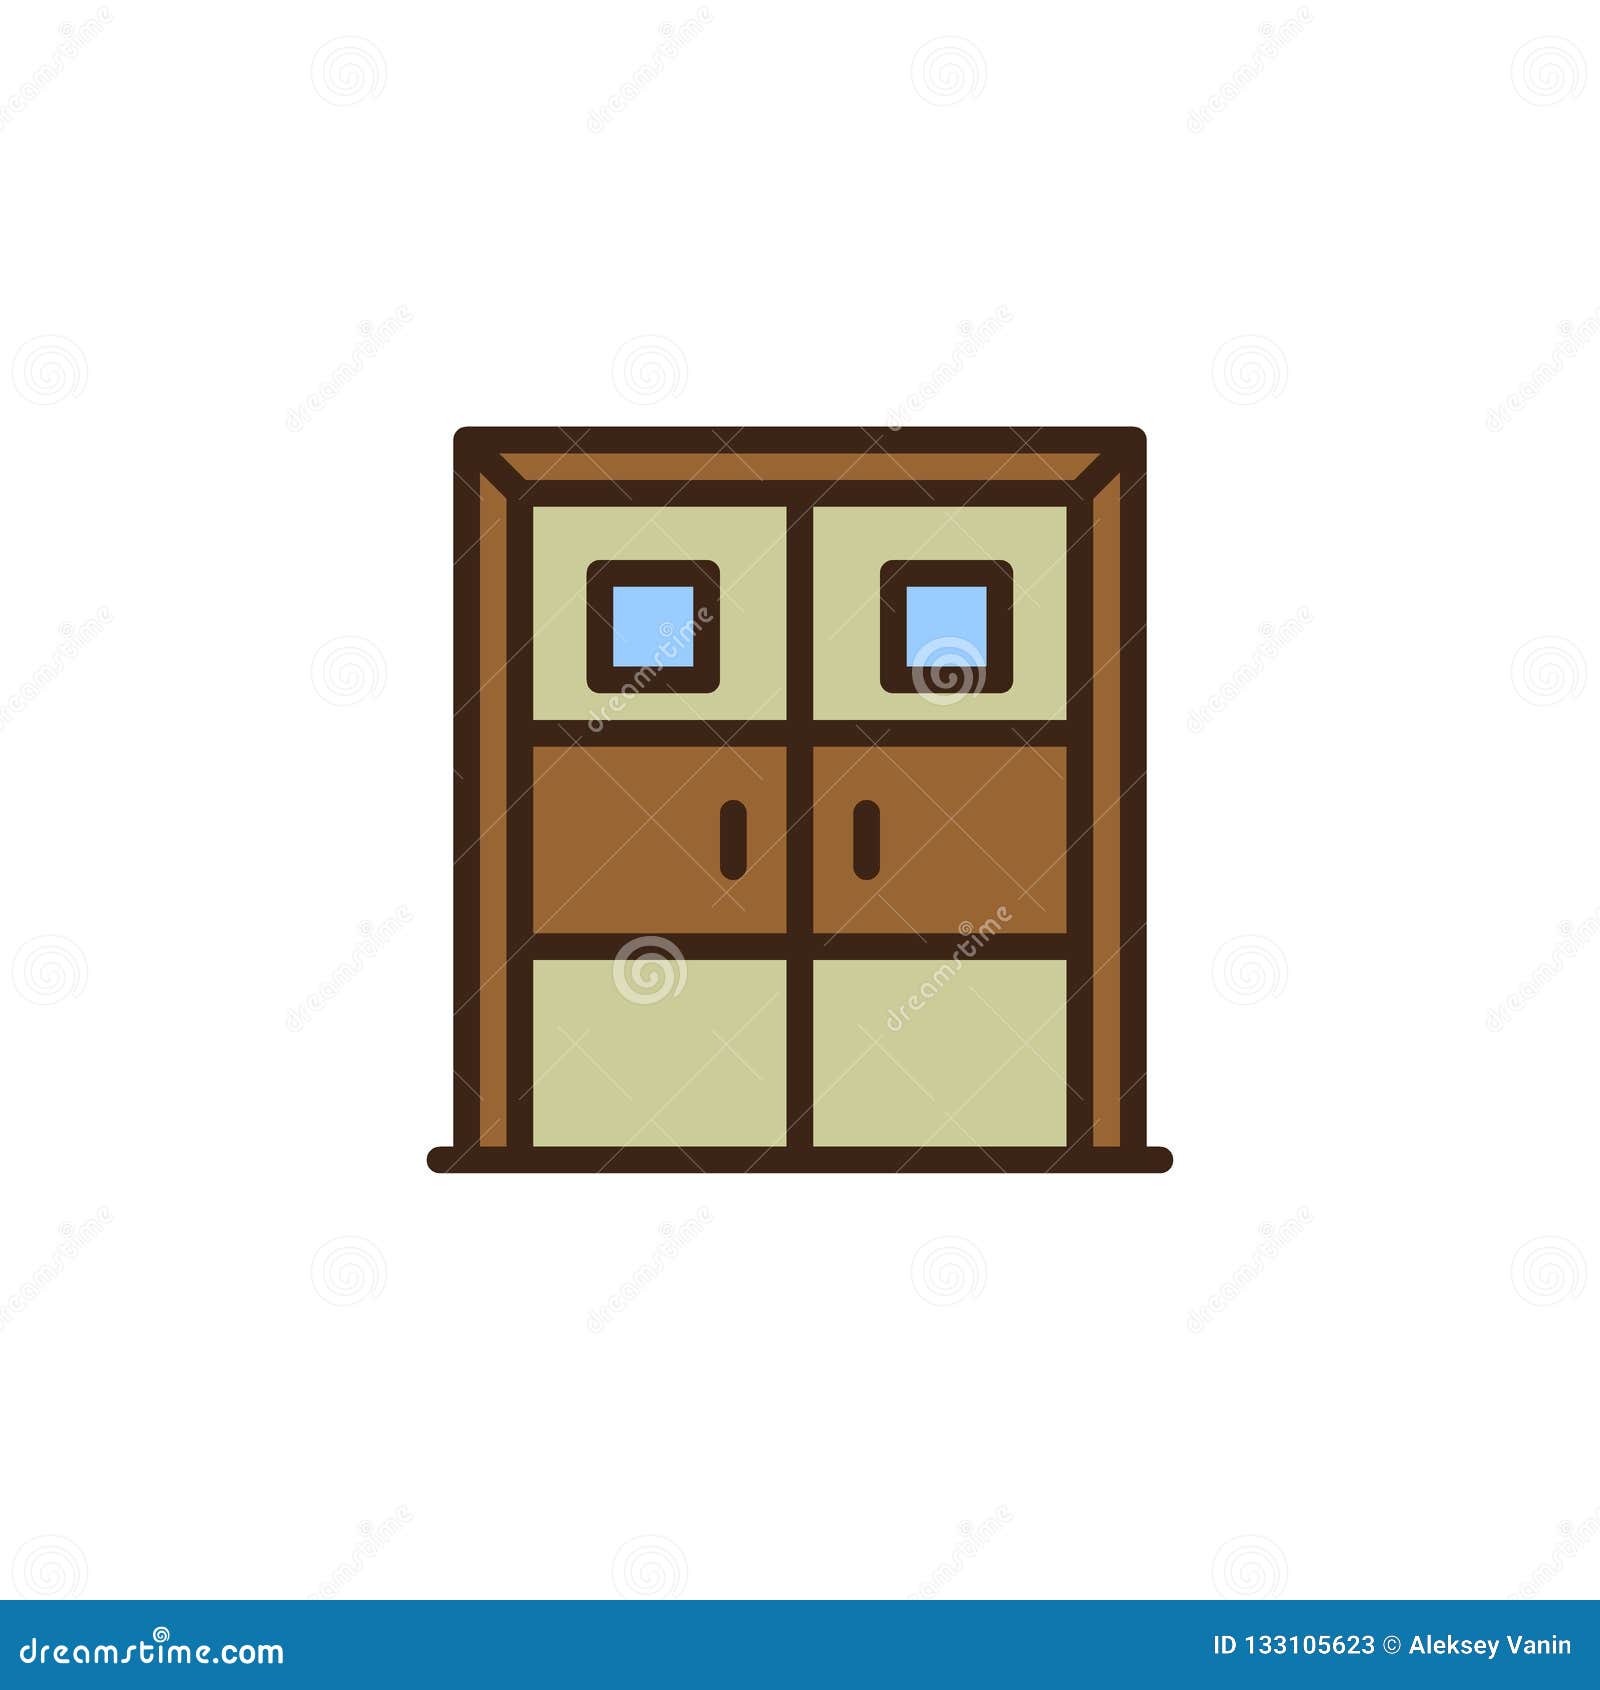 Laboratory Doors Filled Outline Icon Stock Vector - Illustration of ...